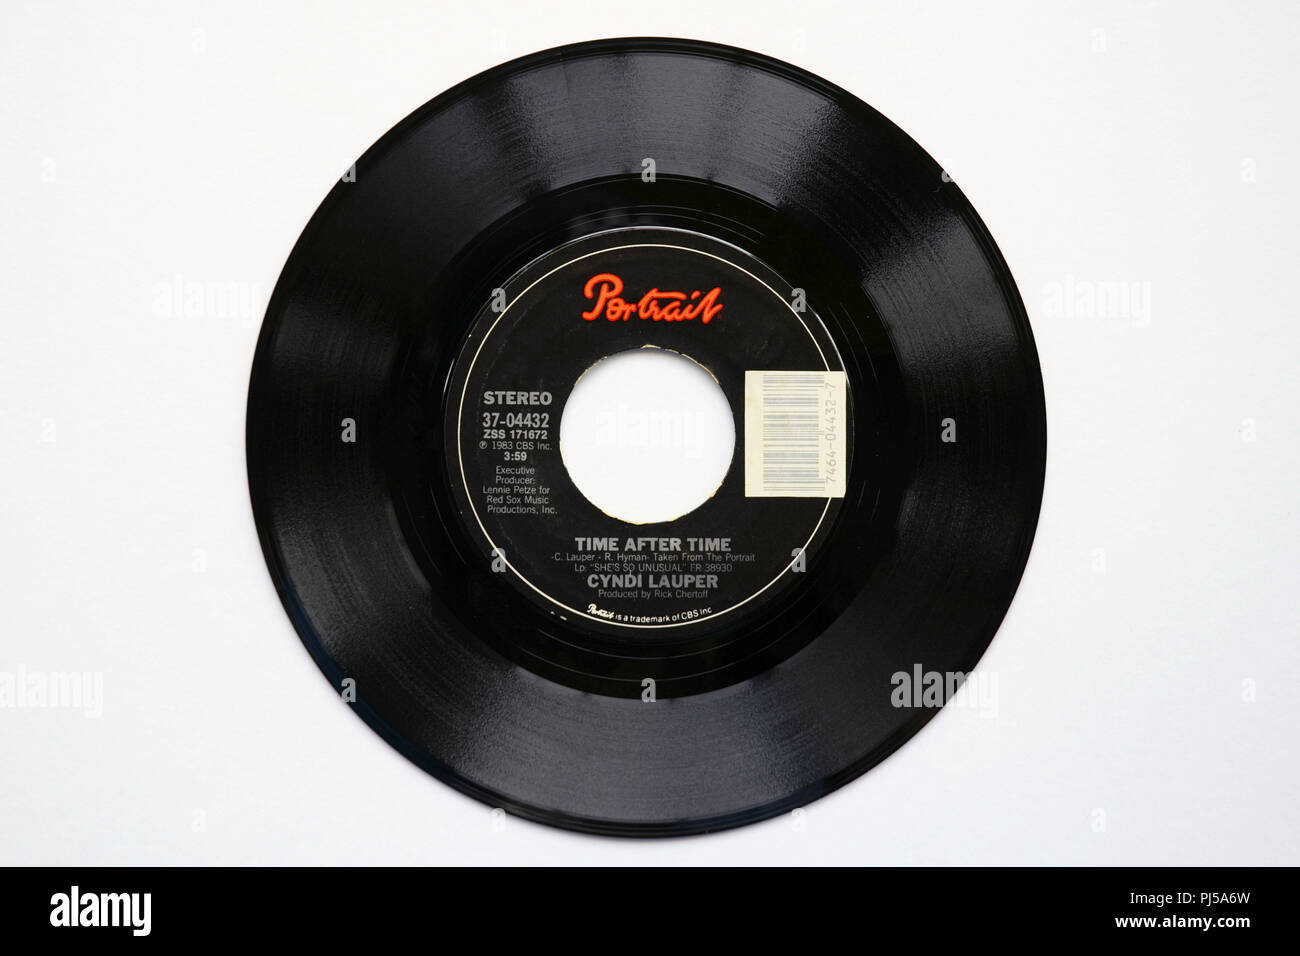 45 RPM vinyl record of Cyndi Lauper's song 'Time after Time' released in 1983 by Portrait Records. Stock Photo